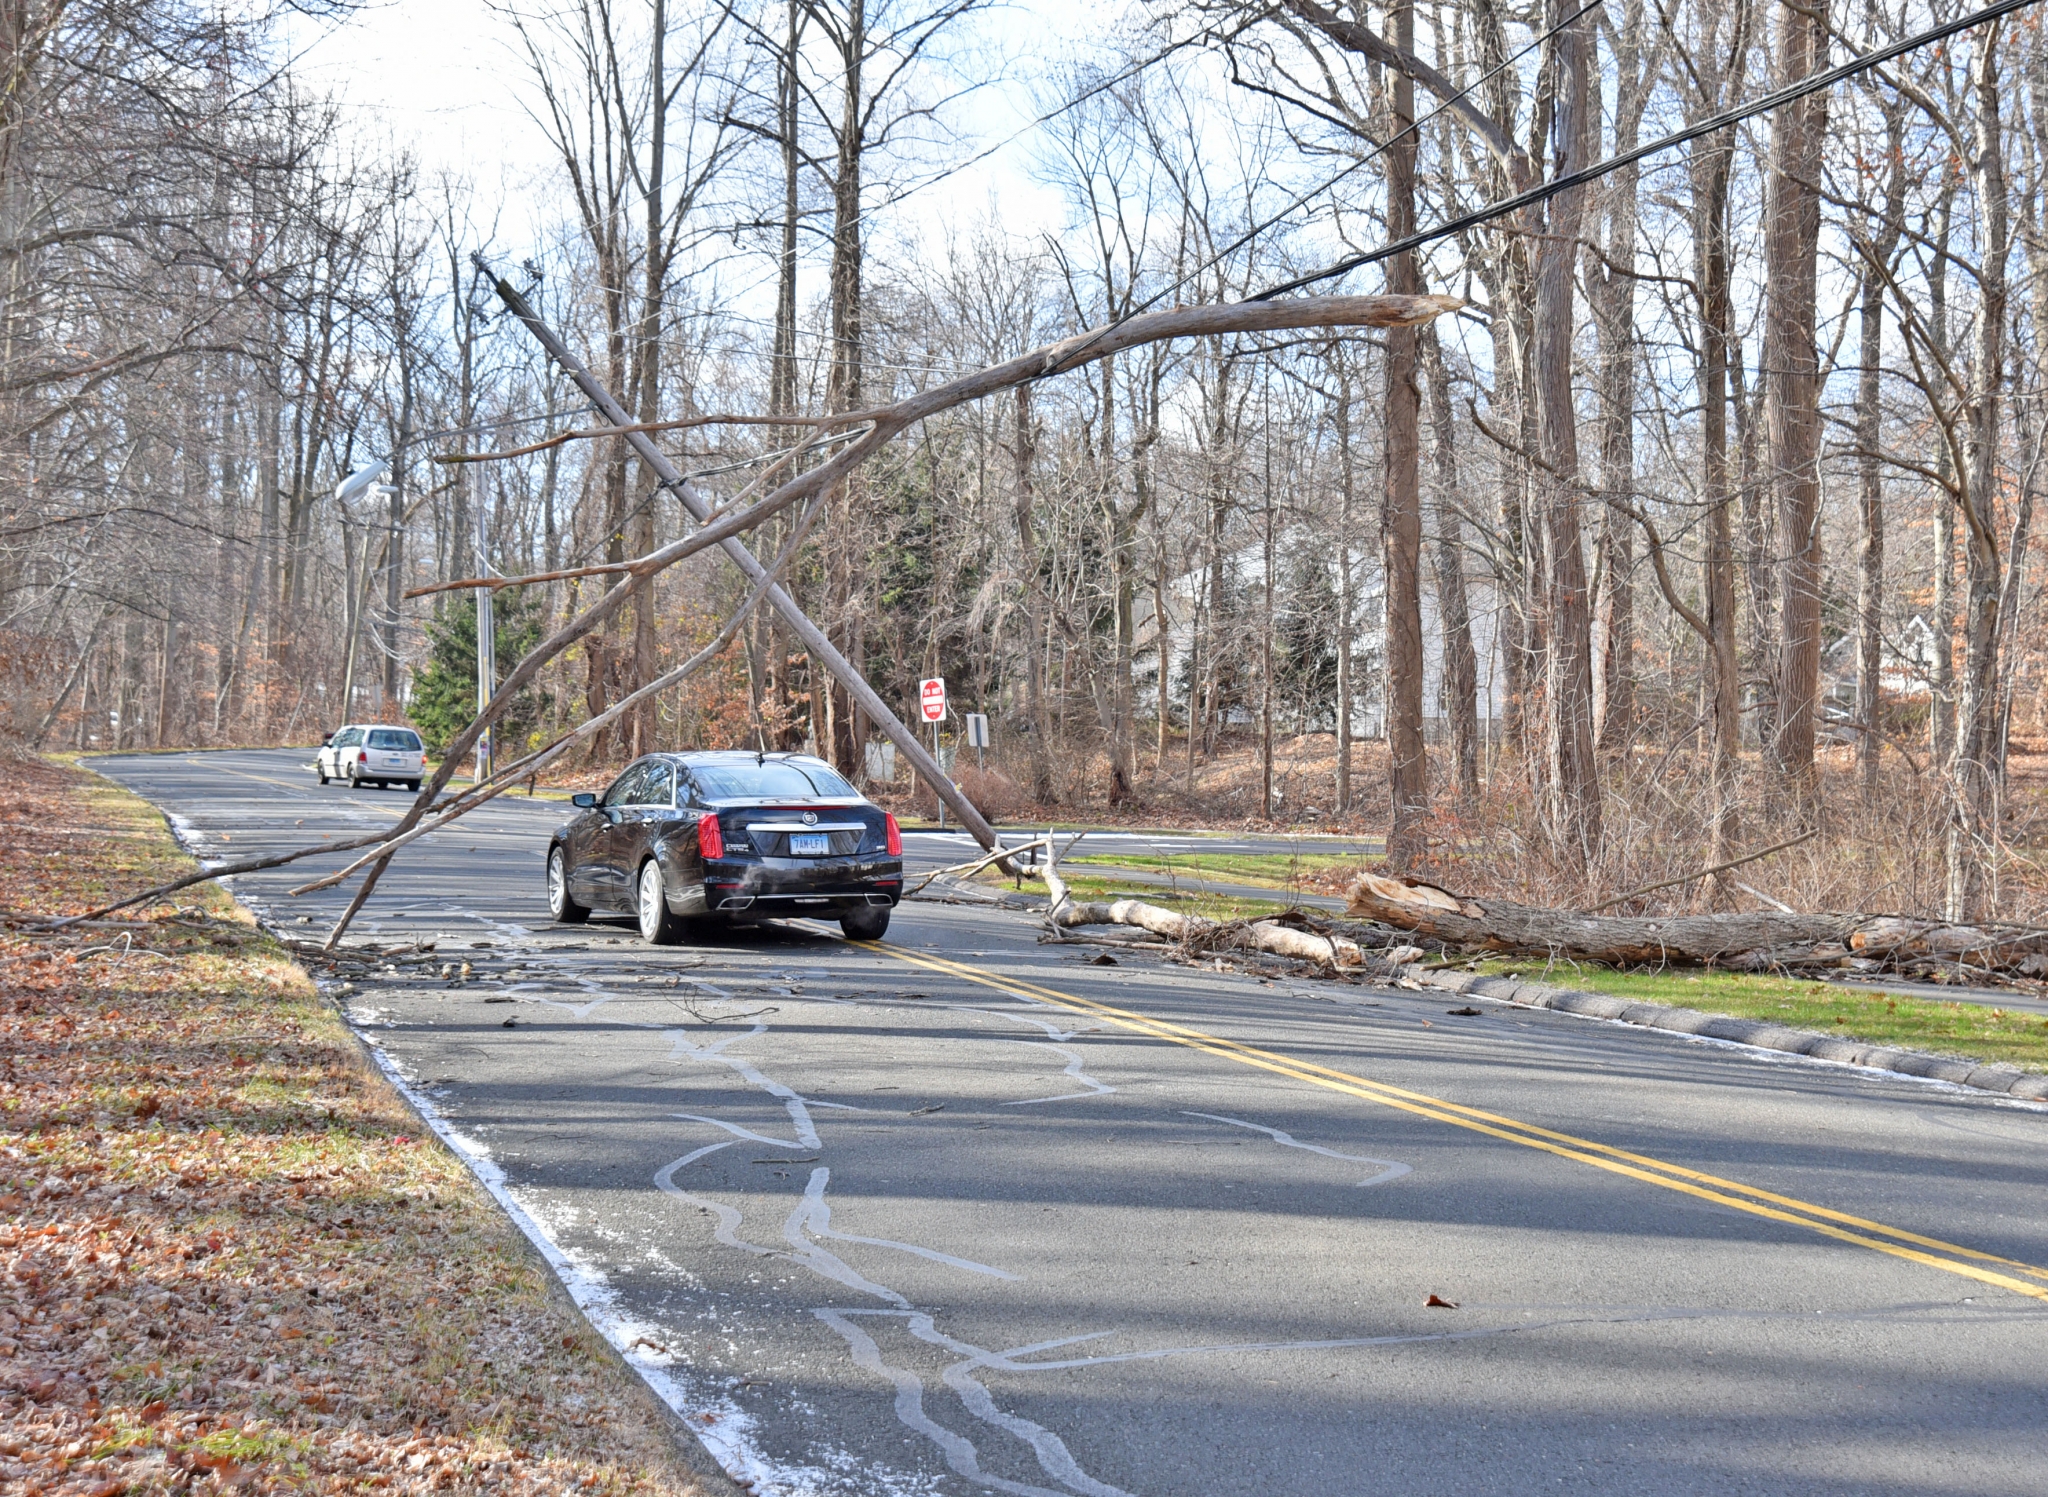 High wind warning: Widespread power outages possible - Westport News